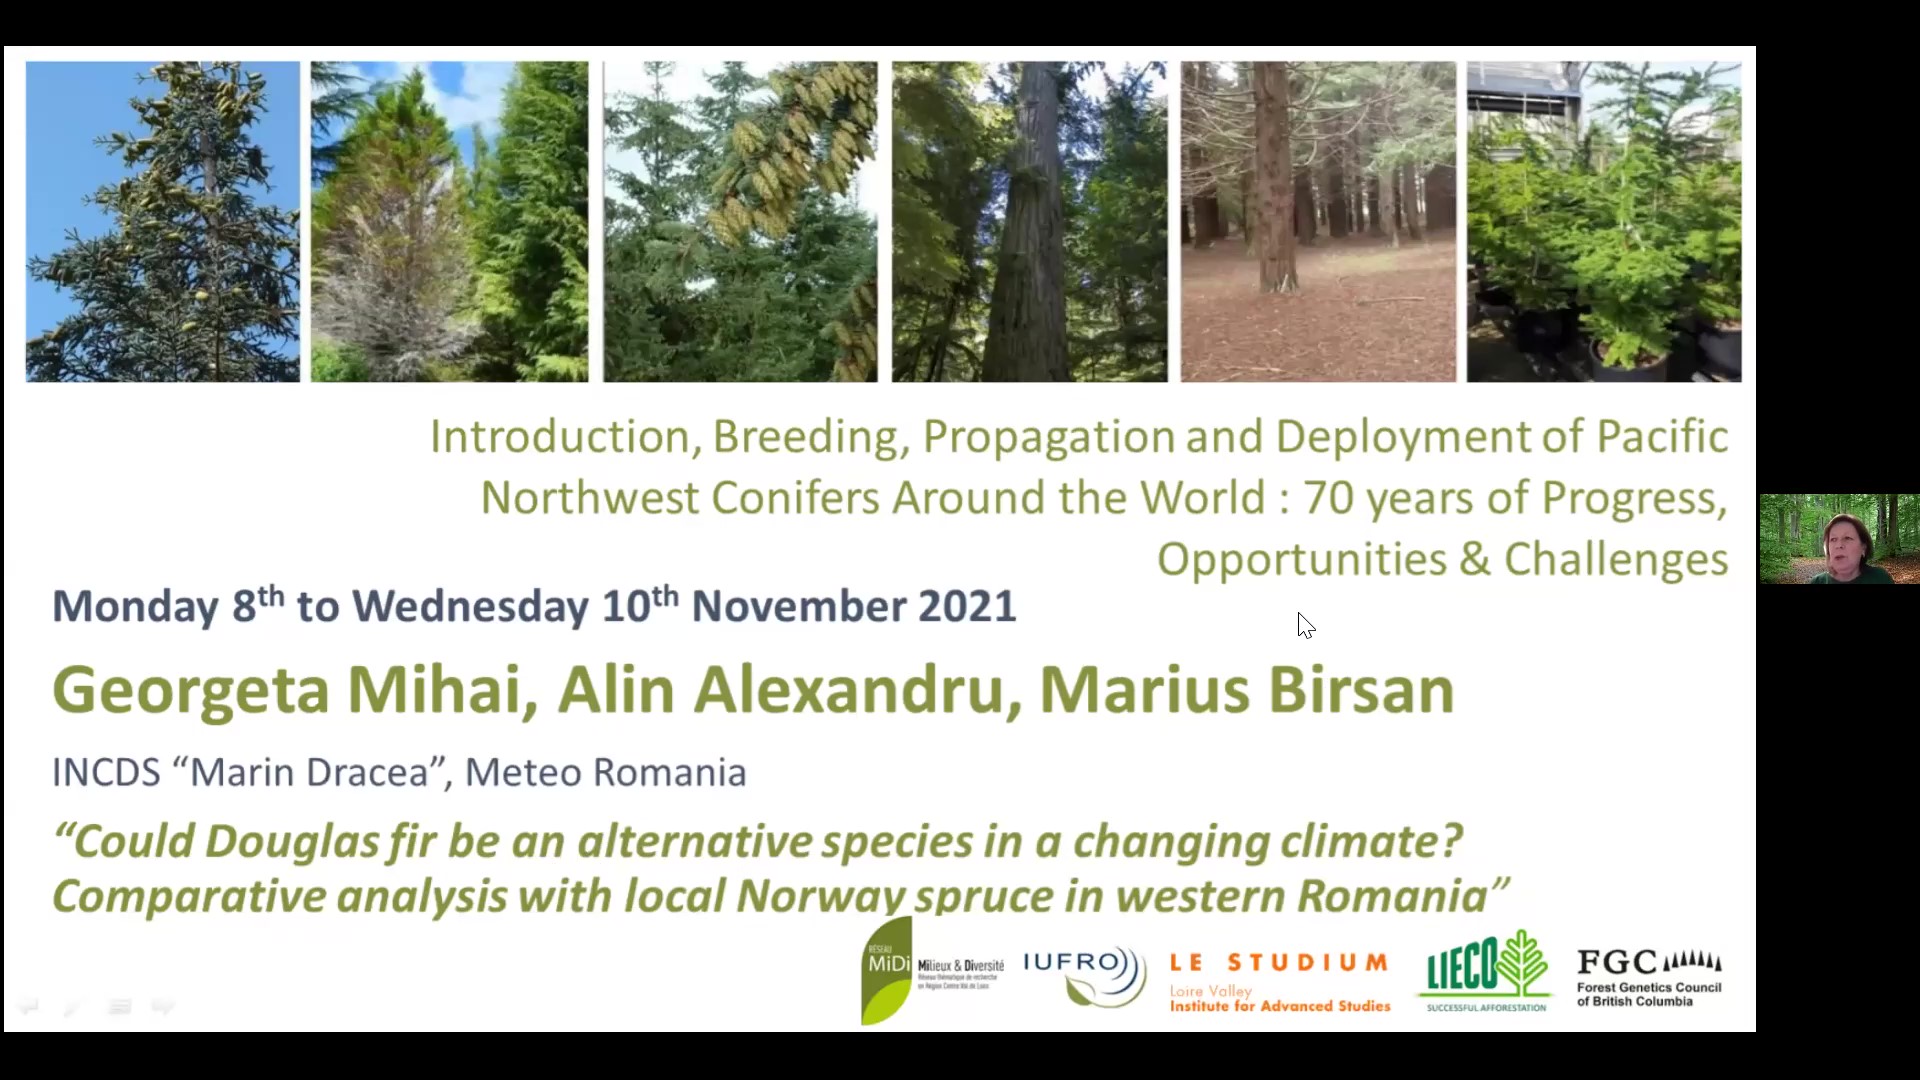 Could Douglas fir be an alternative species in a changing climate? Comparative analysis with local Norway spruce in western Romania -  Georgeta Mihai